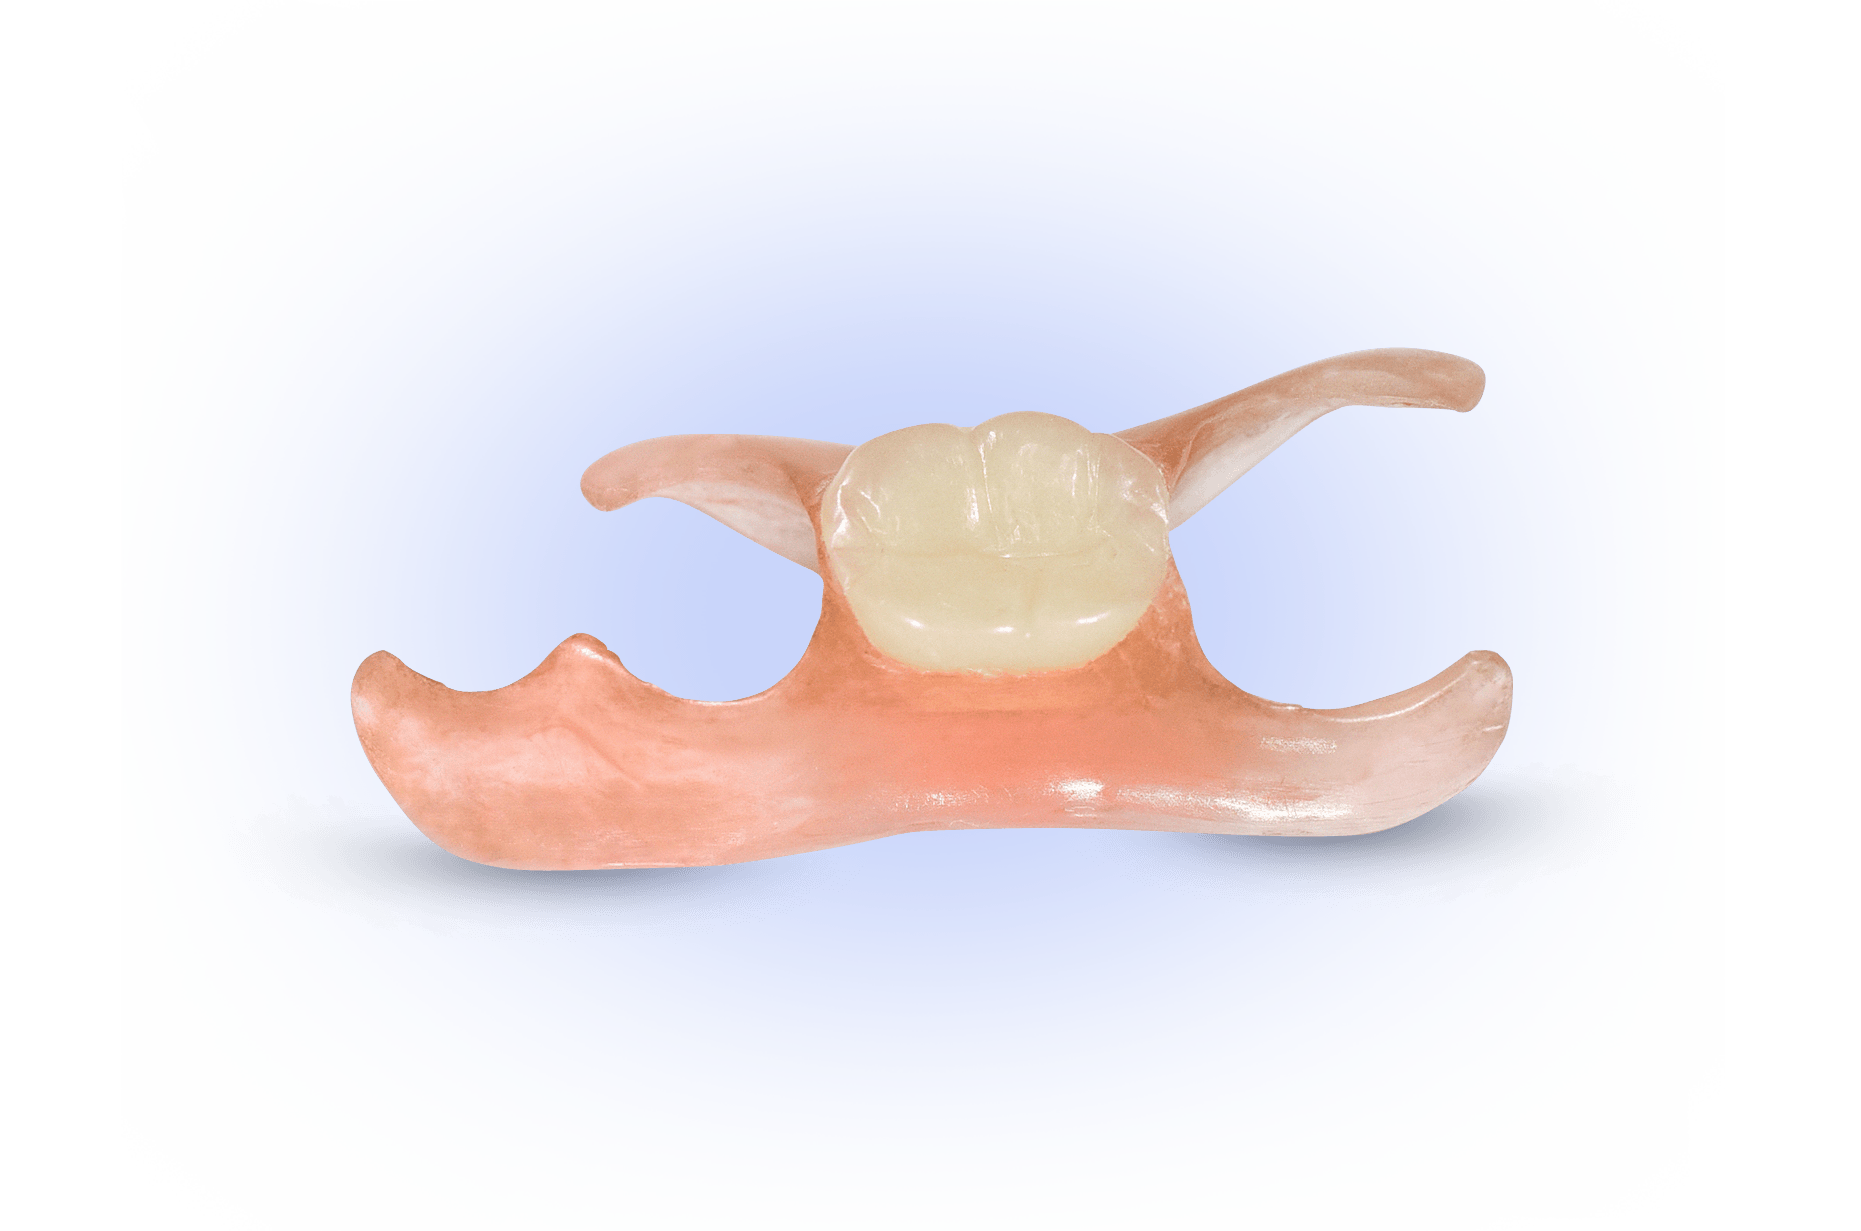 A close up of a denture with a tooth on it